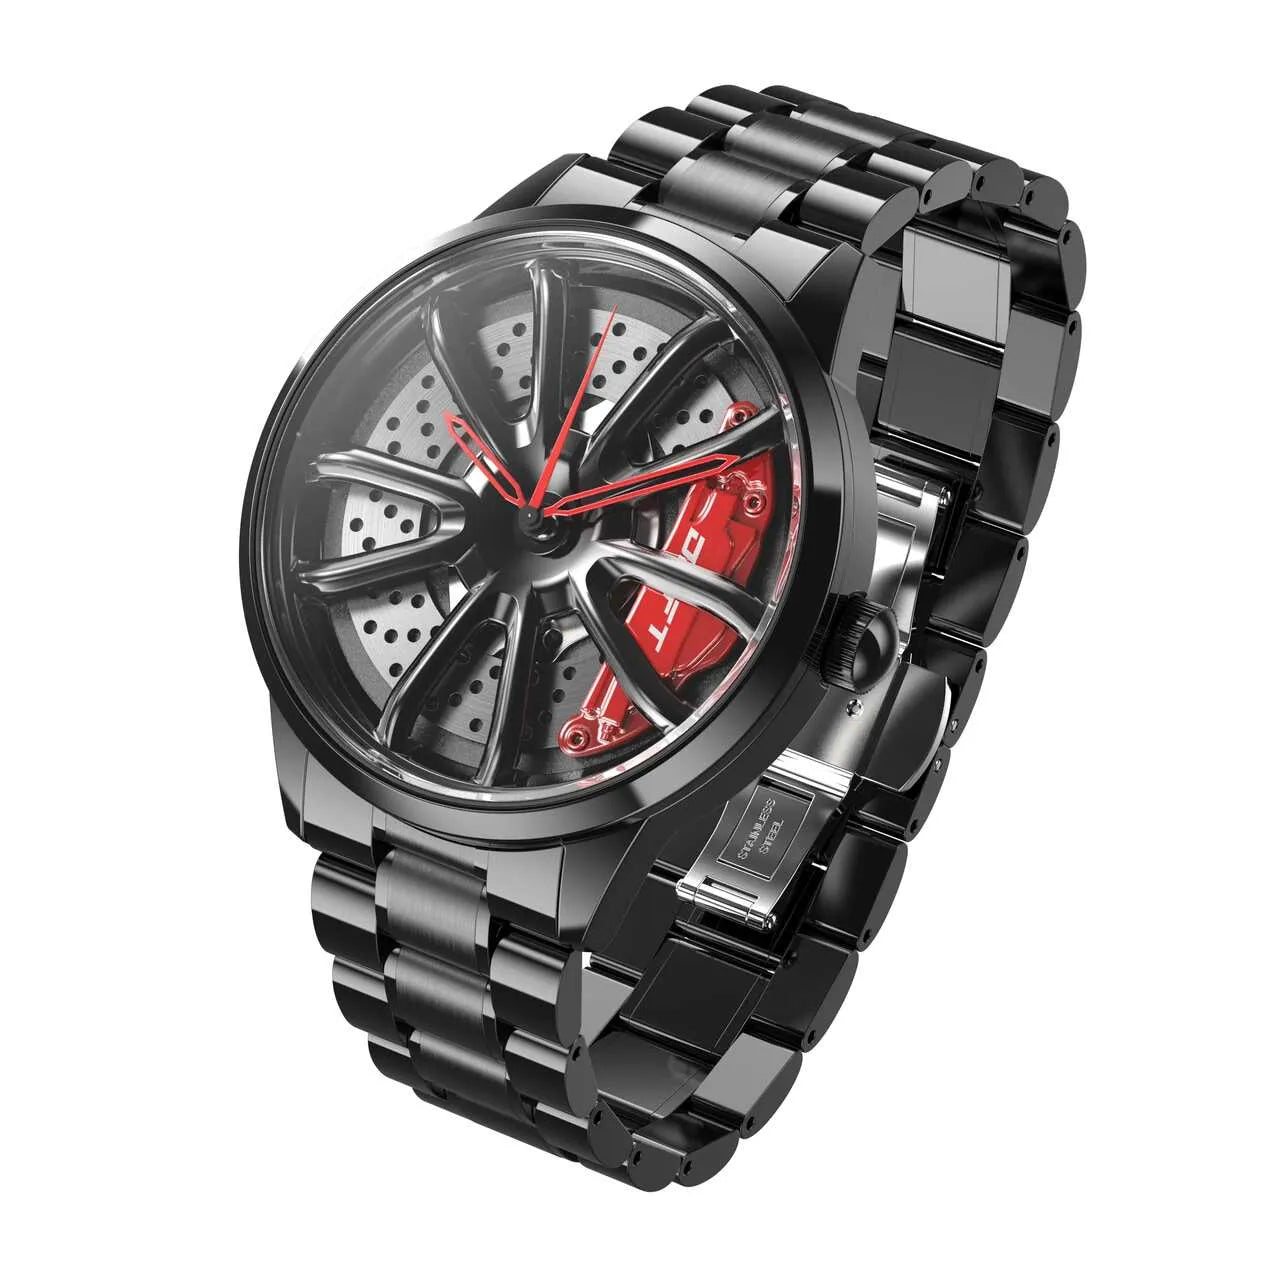 Elevate your fashion with our sleek red Performance GT Rim Watch! Precision-crafted by a German startup, these watches are designed for motorsport, tuning, and auto aficionados. Get ready to ignite your passion! #id_46744365400394